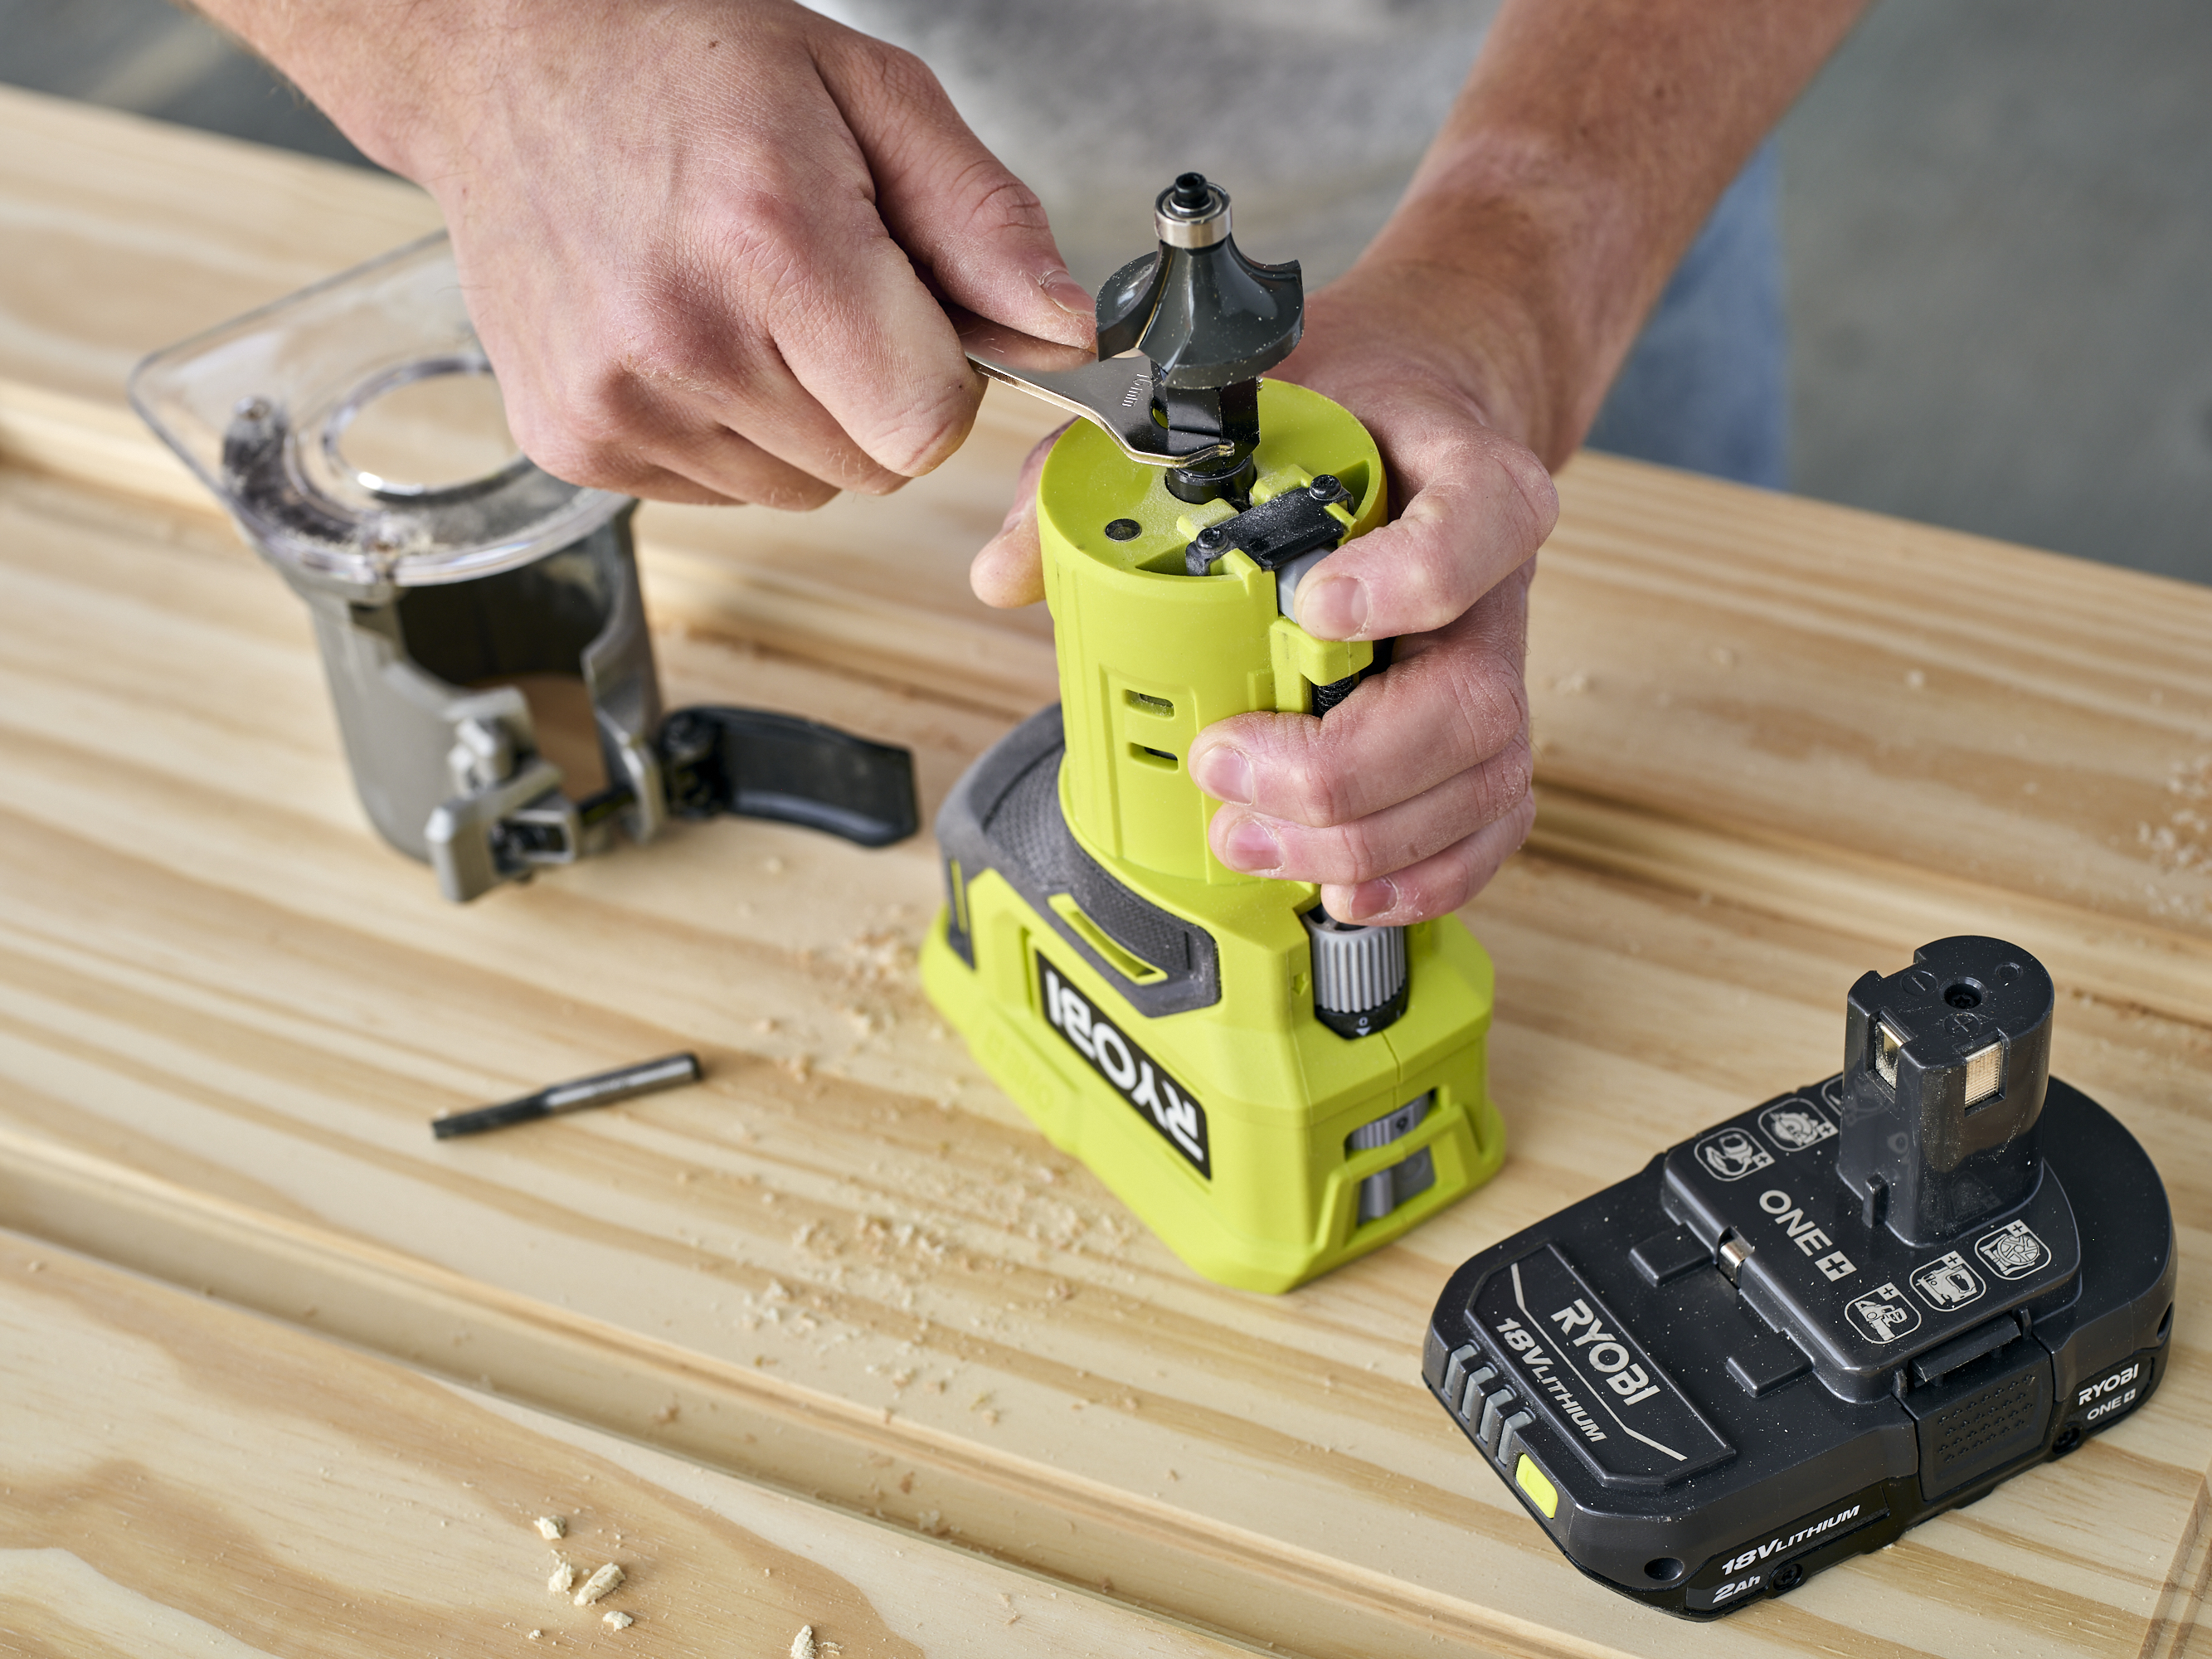 RYOBI 18V ONE+ Cordless Compact Router Kit with 2.0 Ah Battery and